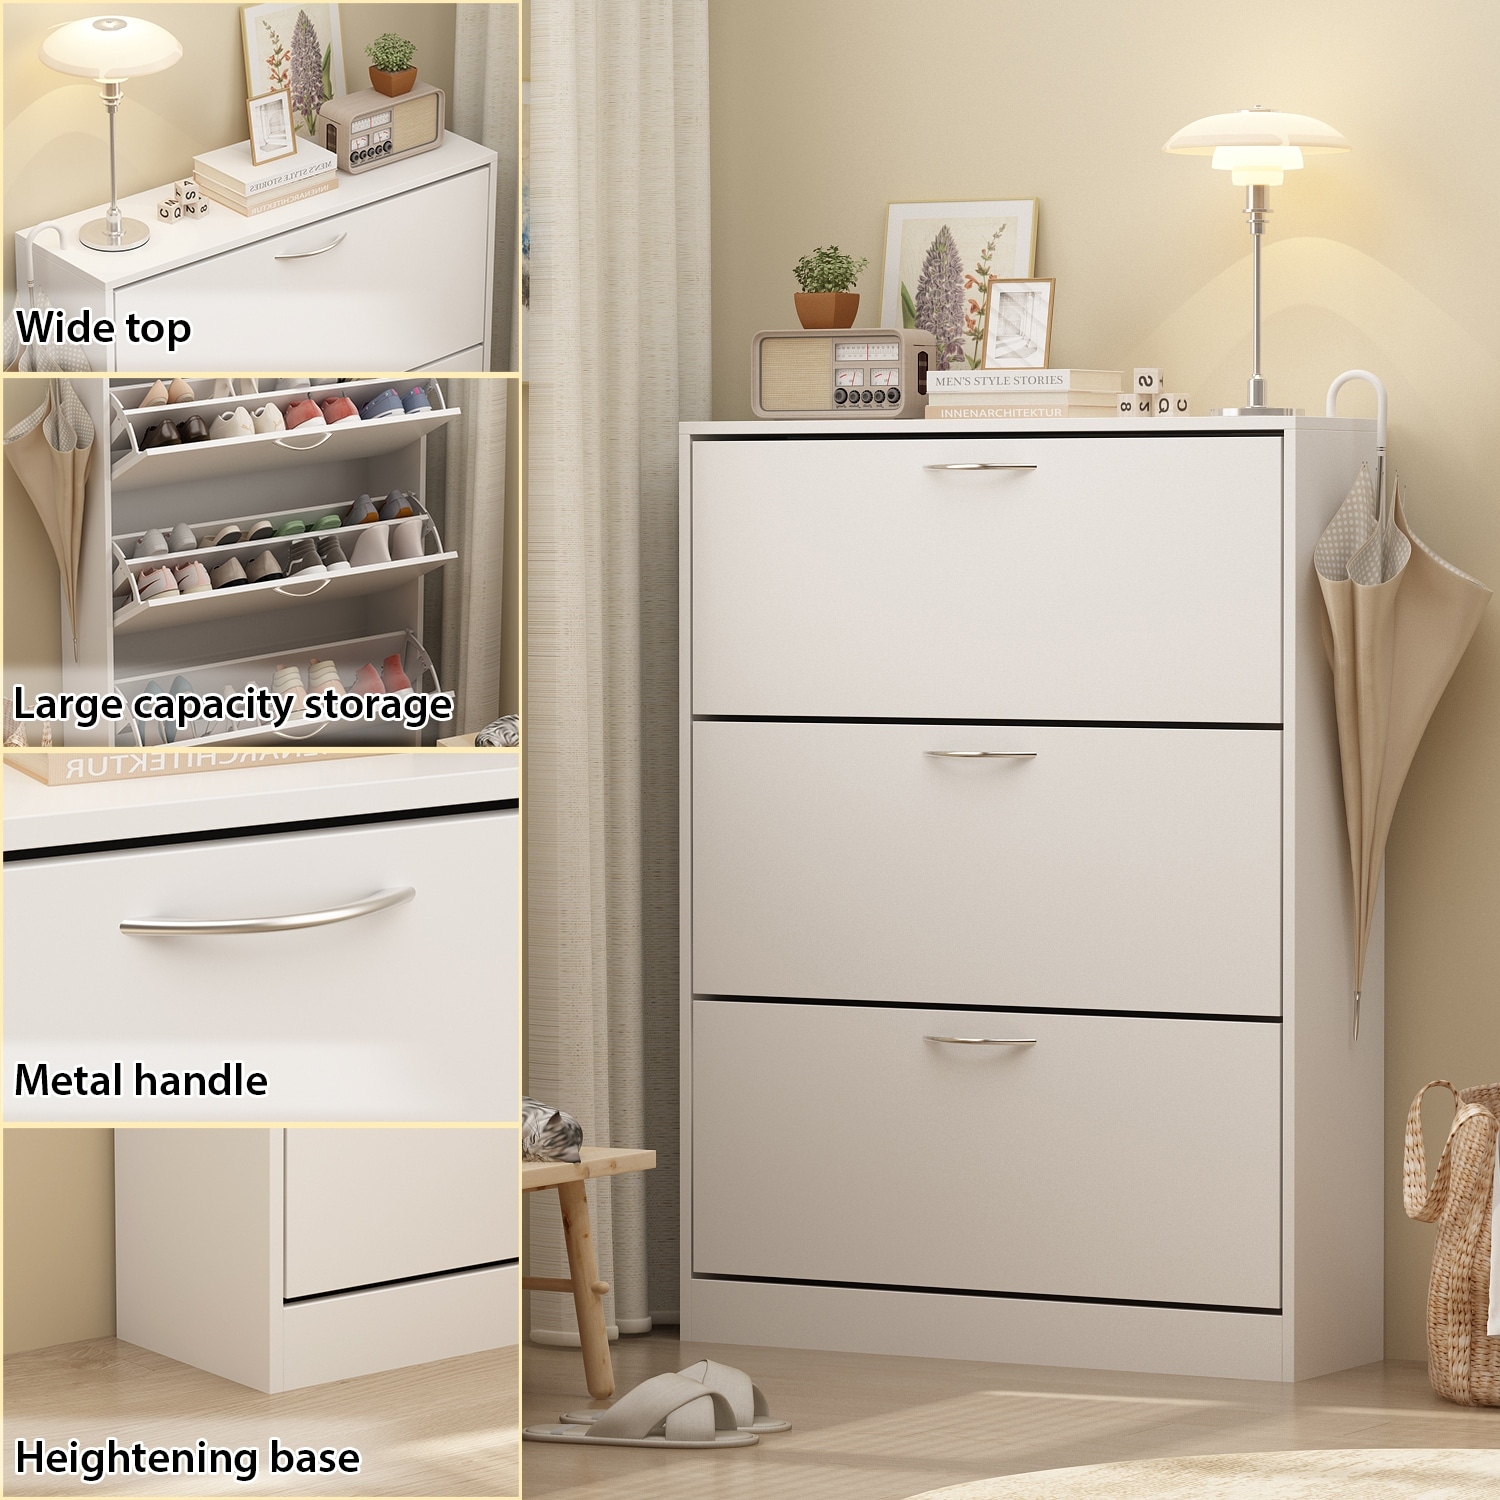 https://ak1.ostkcdn.com/images/products/is/images/direct/995c1279313a1d2bf5f395ff18922ca9e52e2b35/Home-Modern-3-Drawer-Shoe-Cabinet-3-Tier-Shoe-Rack-Storage-Organizer.jpg